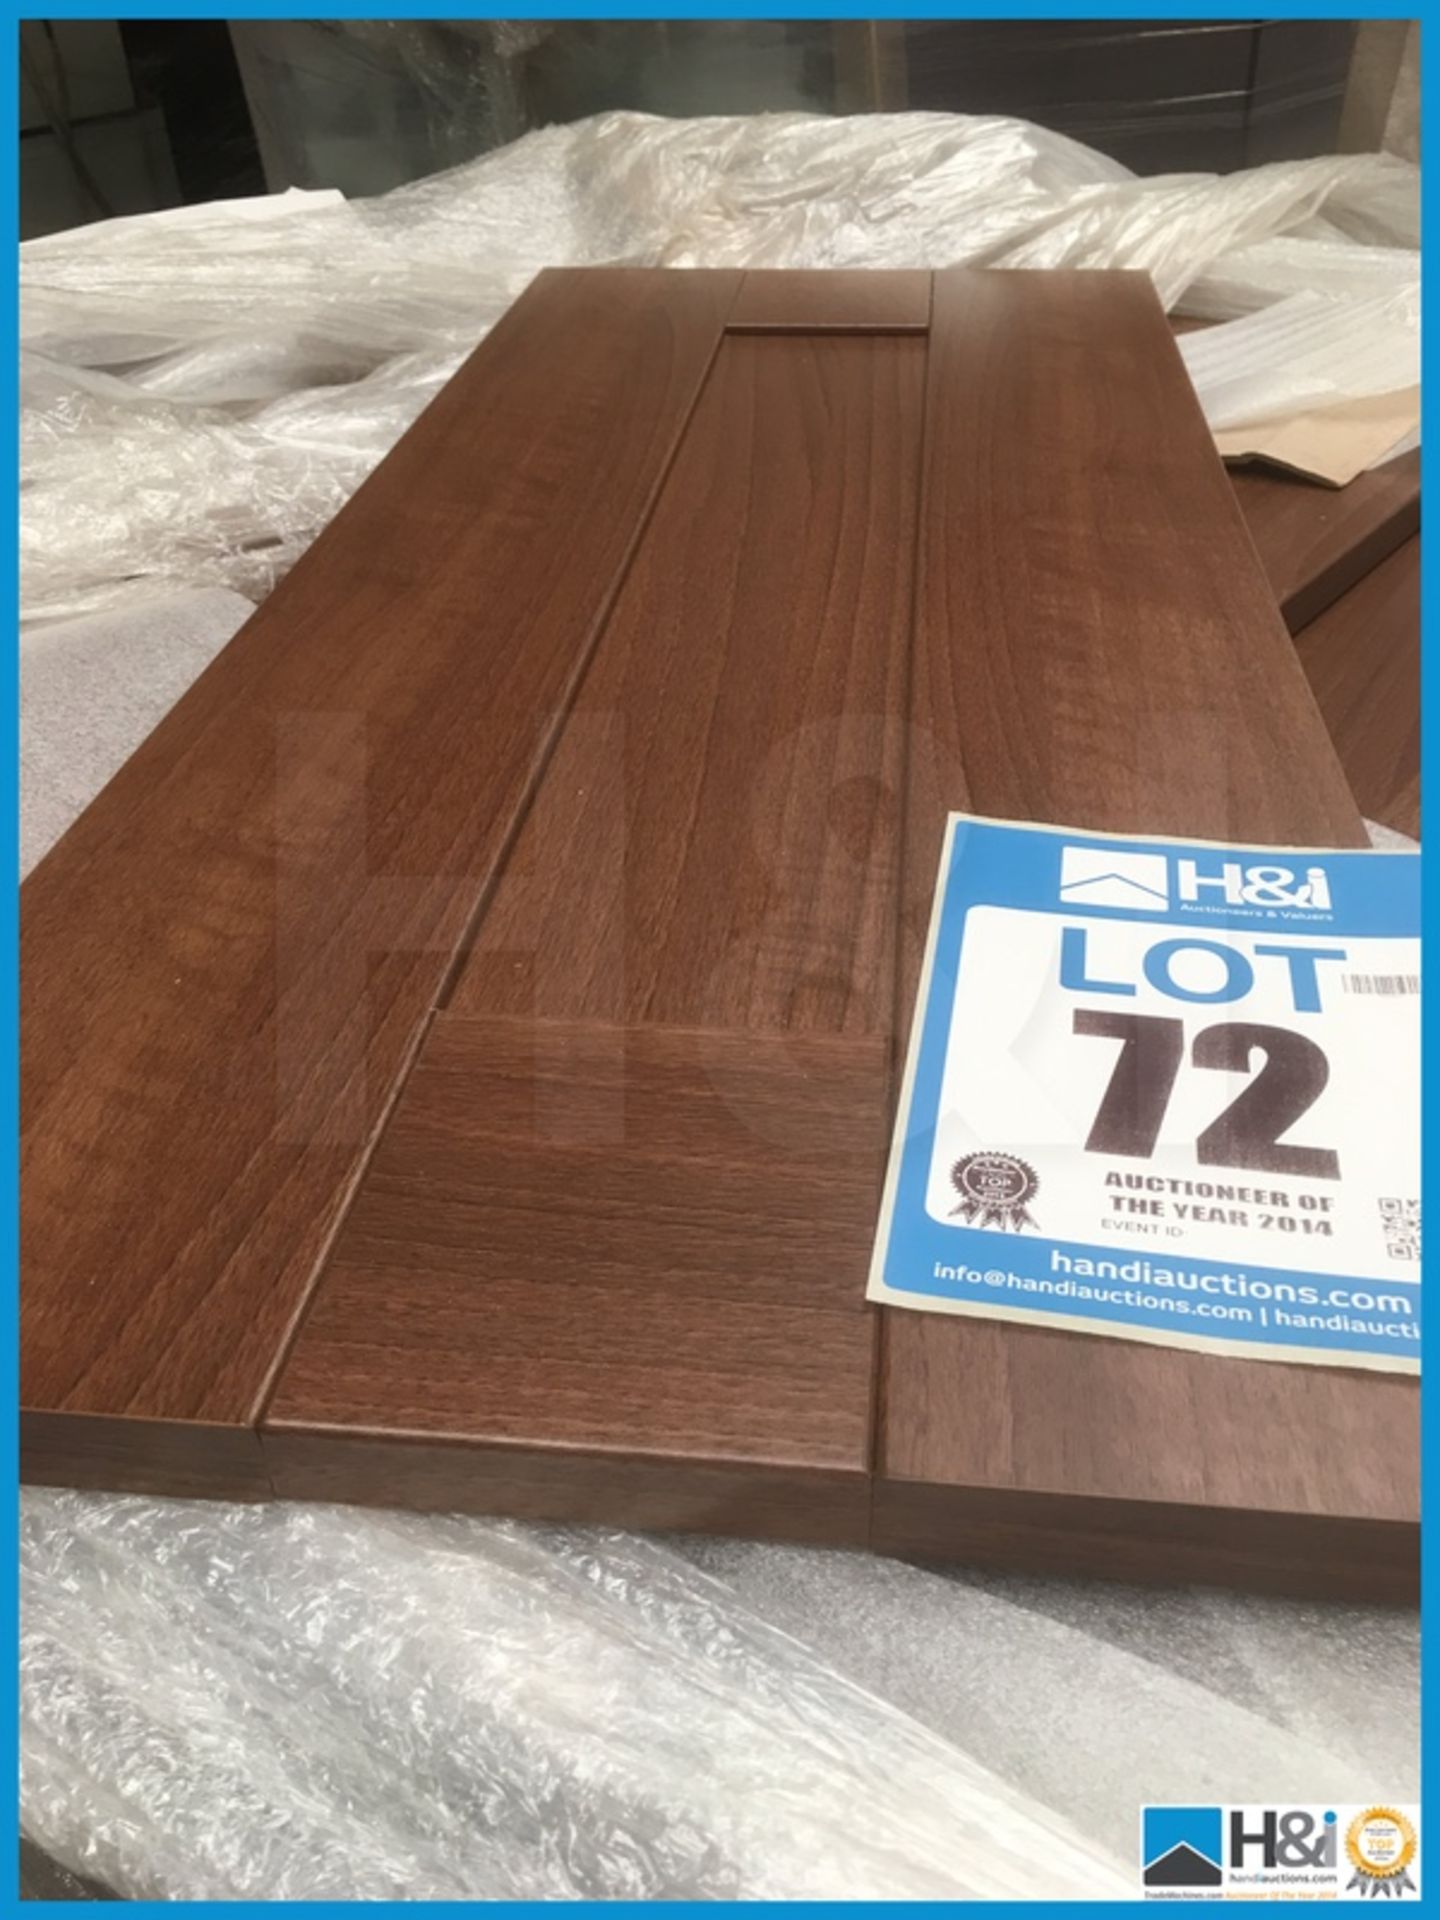 Approx x 9 1245mm X 295 mm American walnut contemporary kitchen door with retail value of lot £